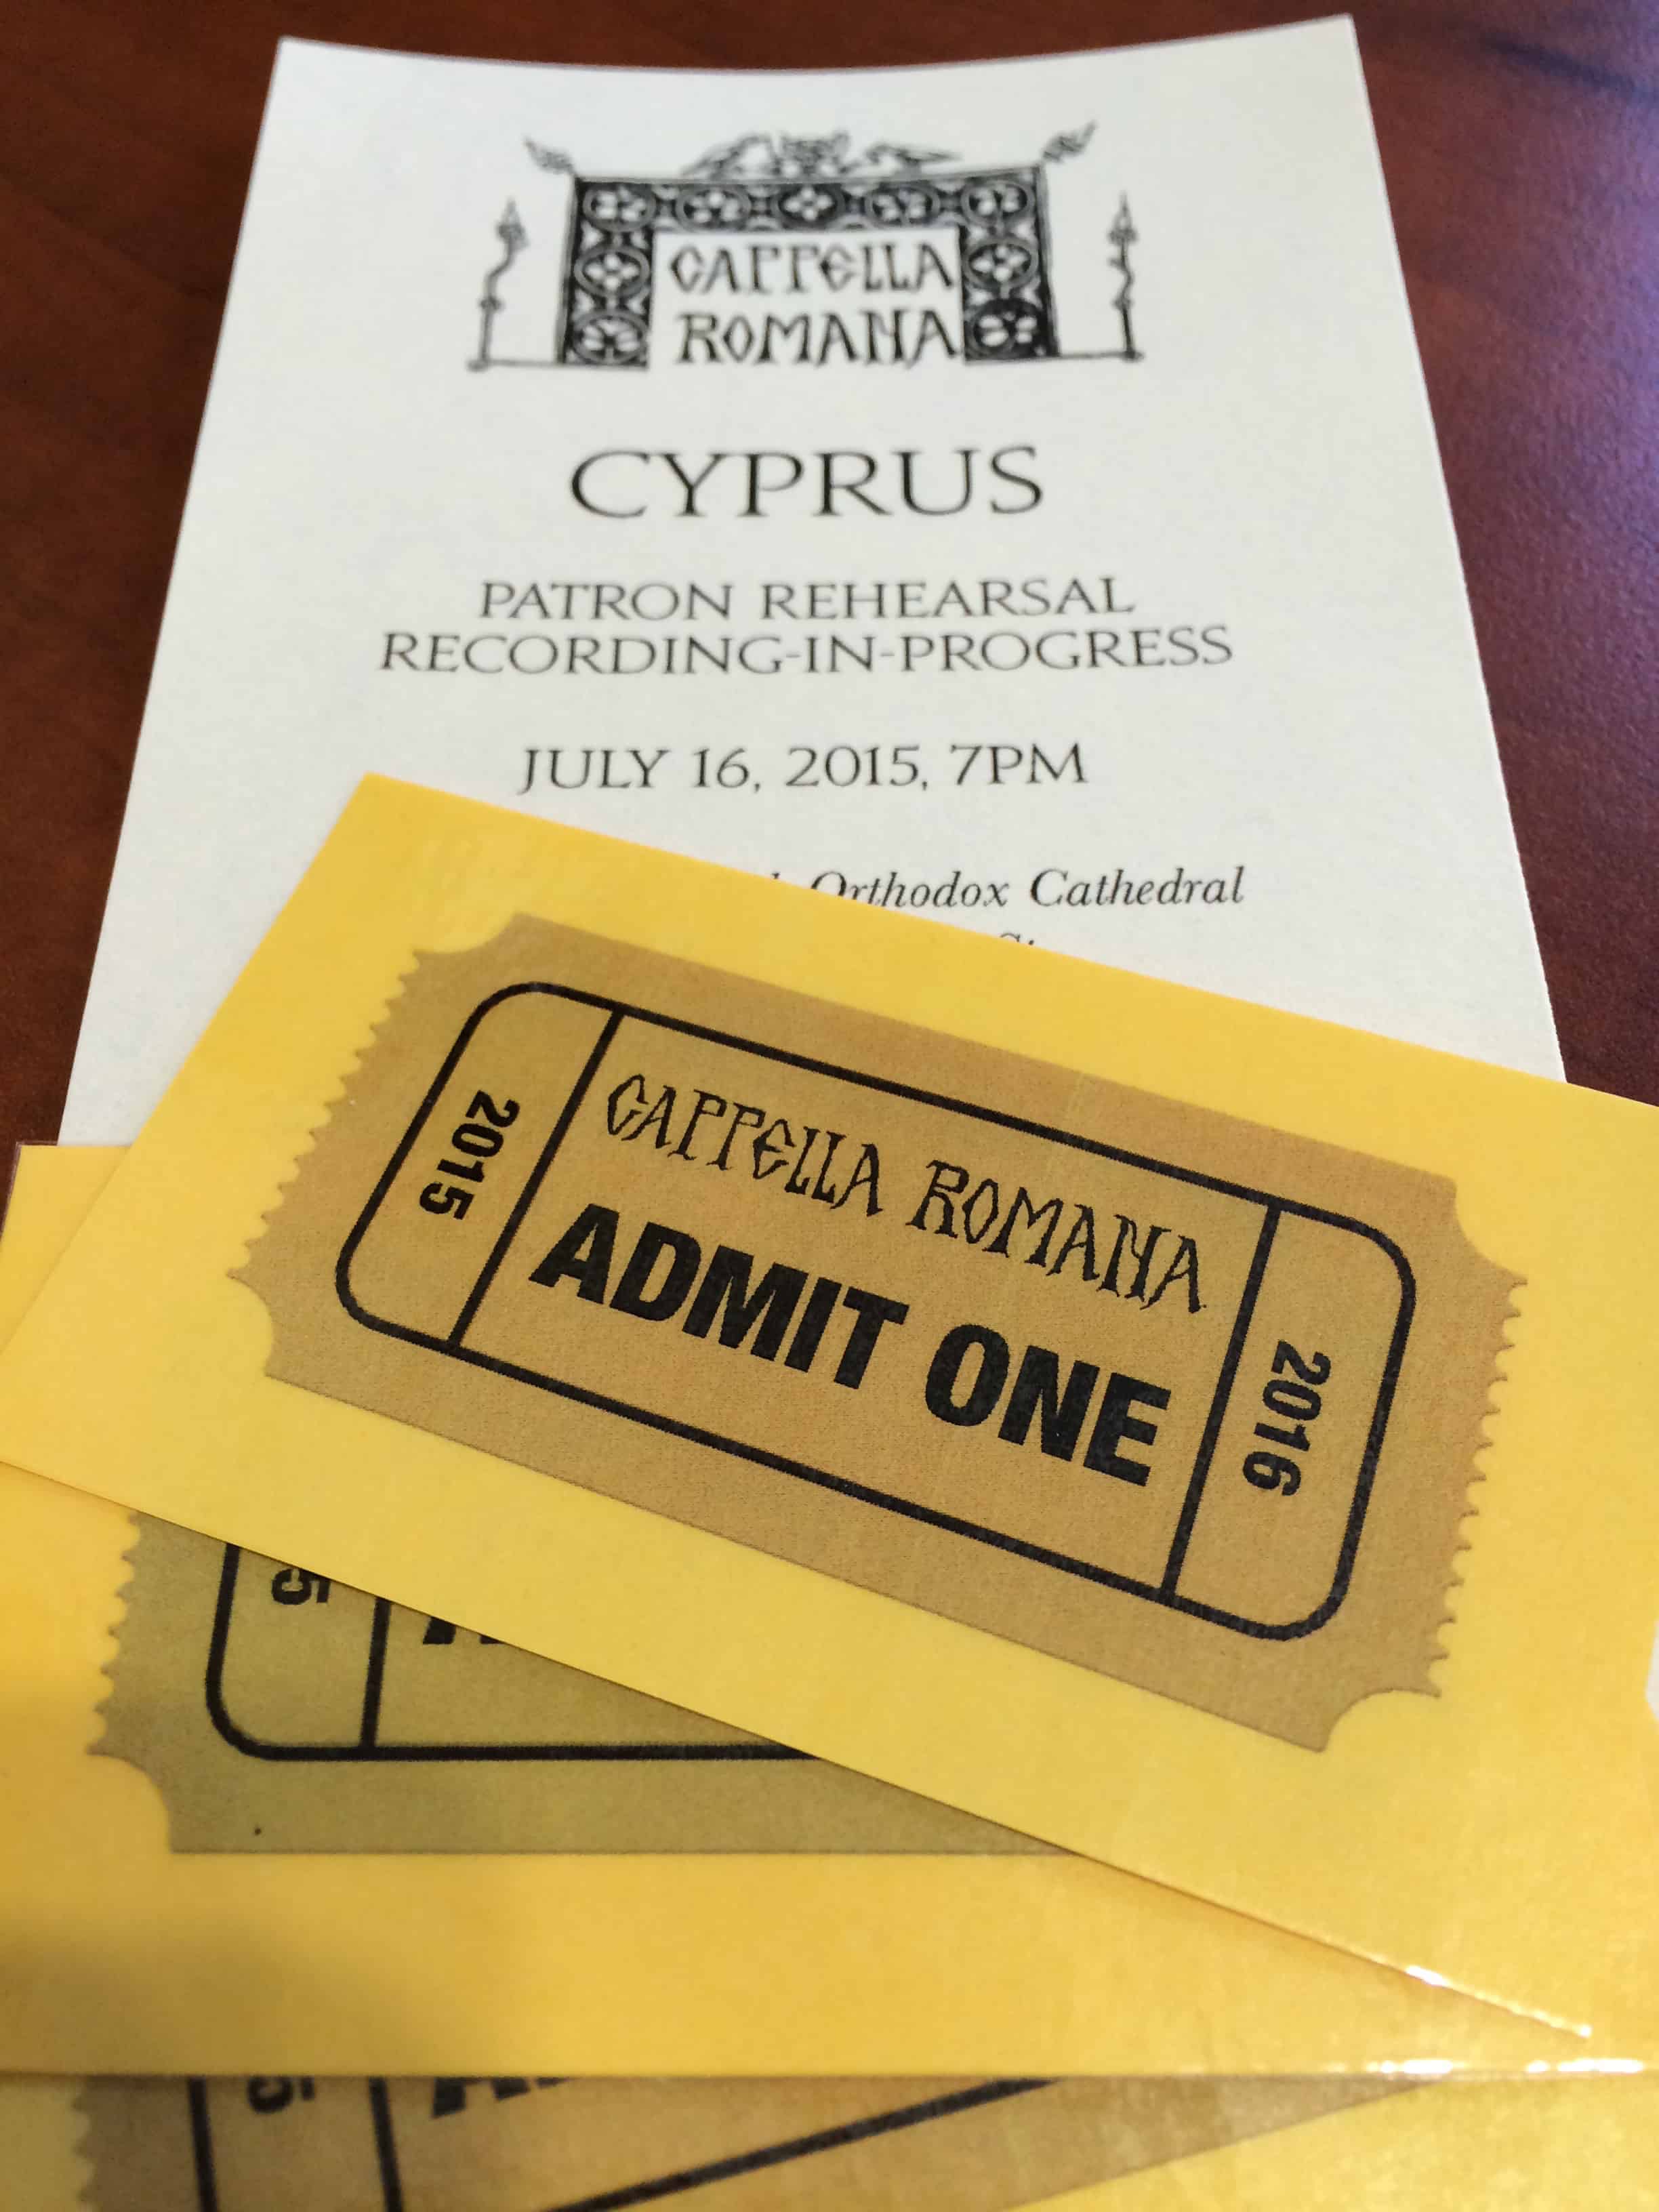 New Benefits for Donors! Featuring Passes for Cappella Romana Patron Rehearsals